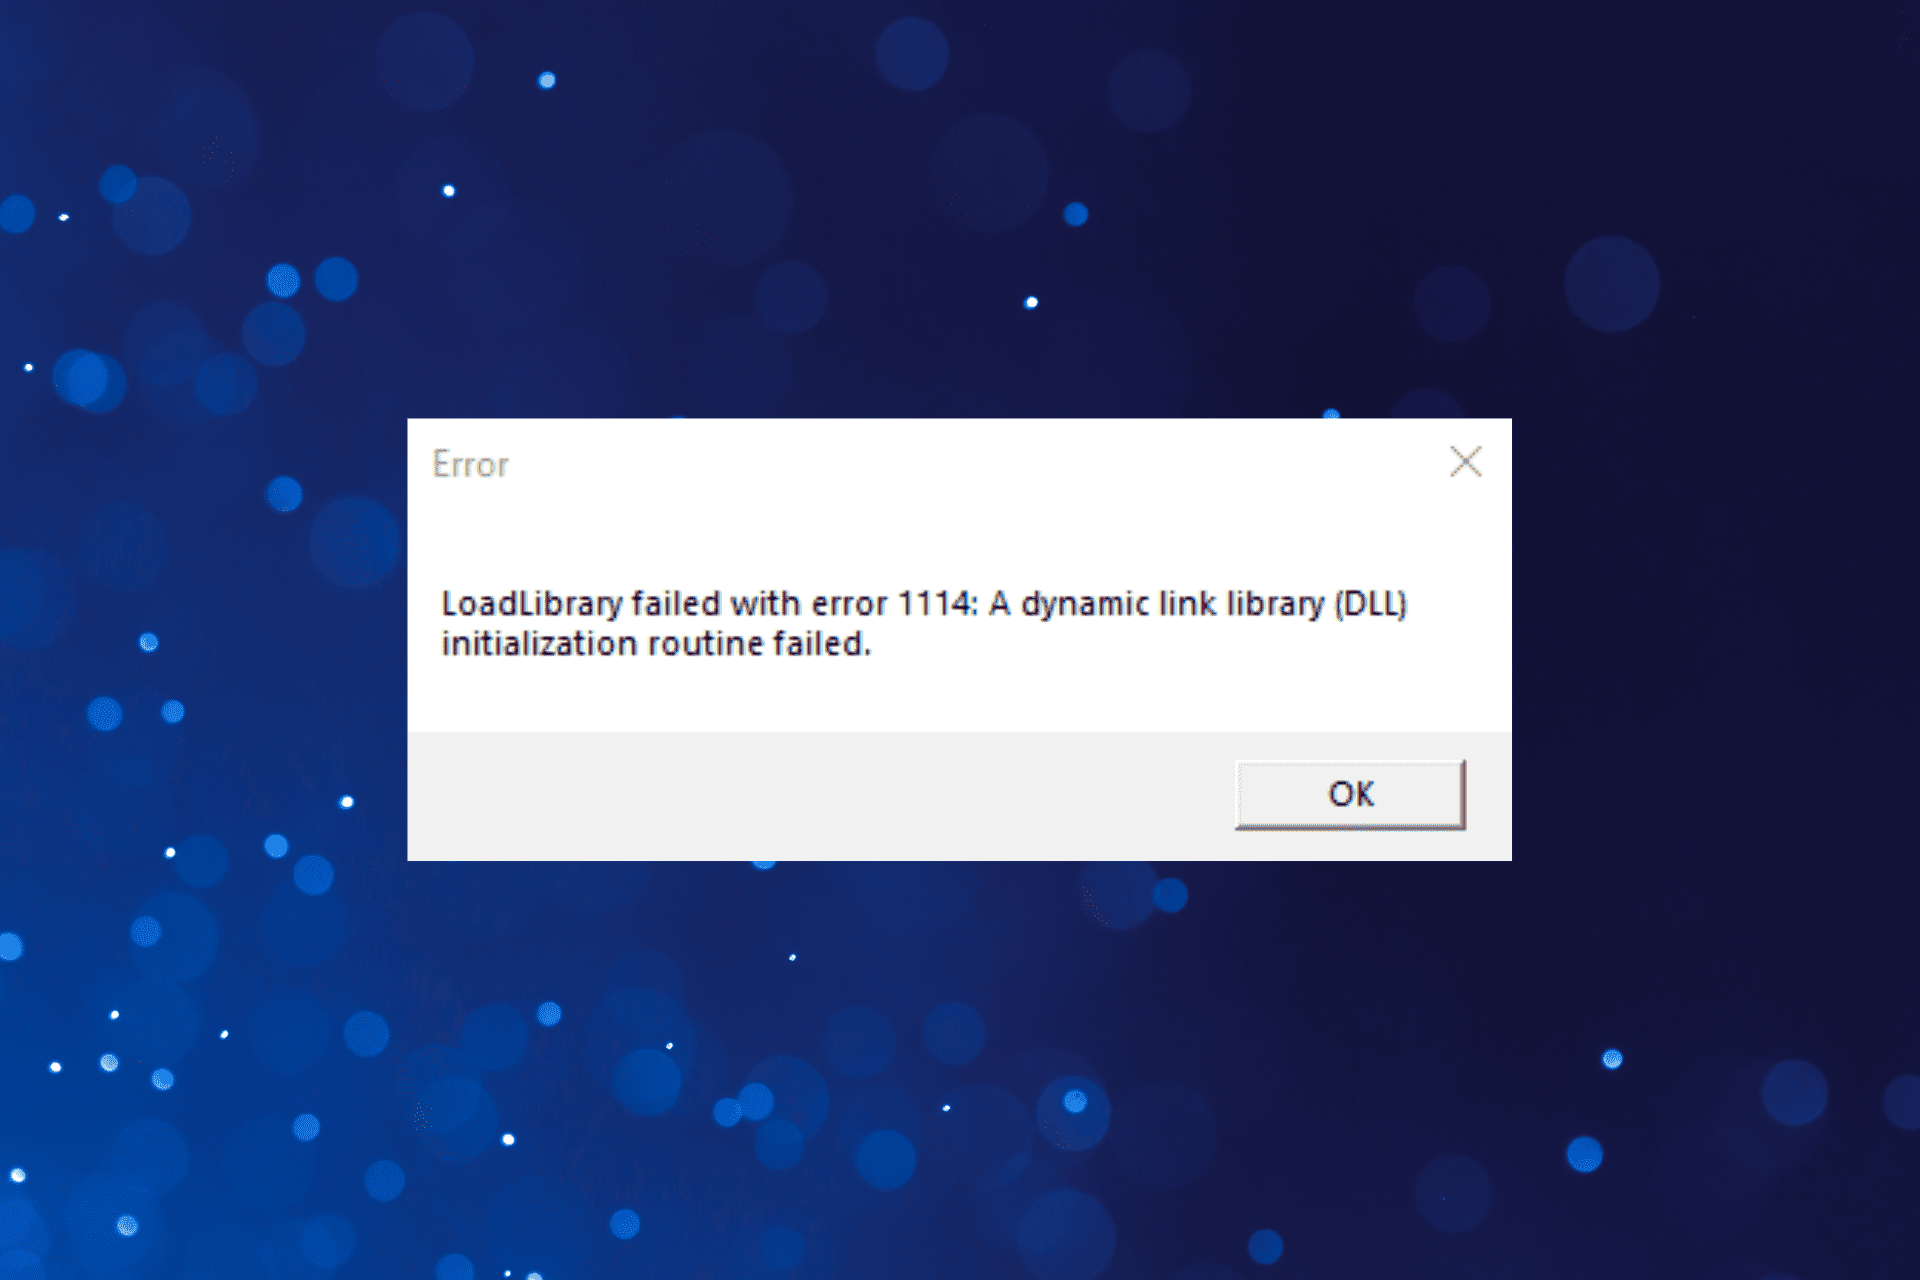 fix loadlibrary failed with error 1114 in Windows